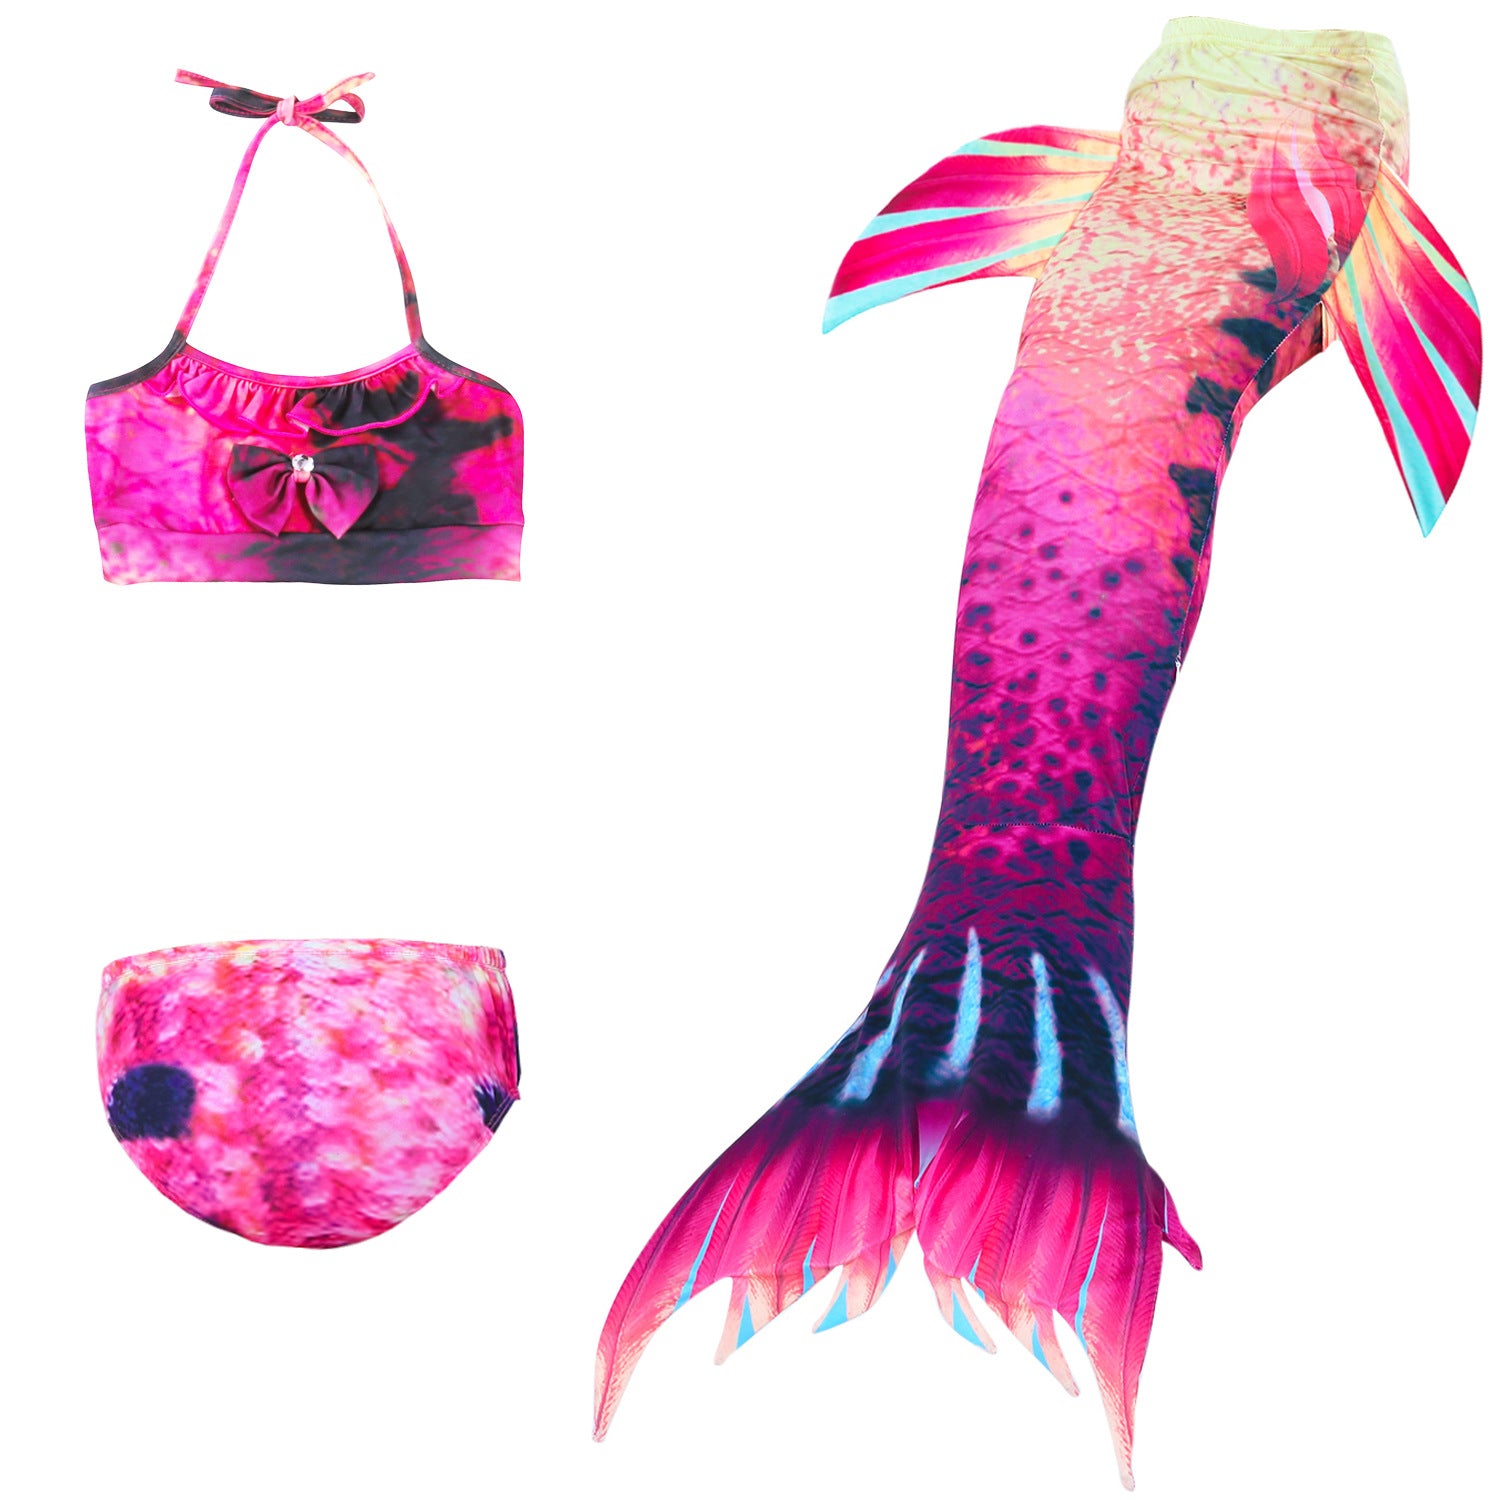 Unusual Pink & Black Mermaid Tail with added dorsal fins. Complete with matching material halterneck bikini with cute embellished bow.  Part of our luxury range, this tail has a high quality side zip. Mini Mermaid Tails